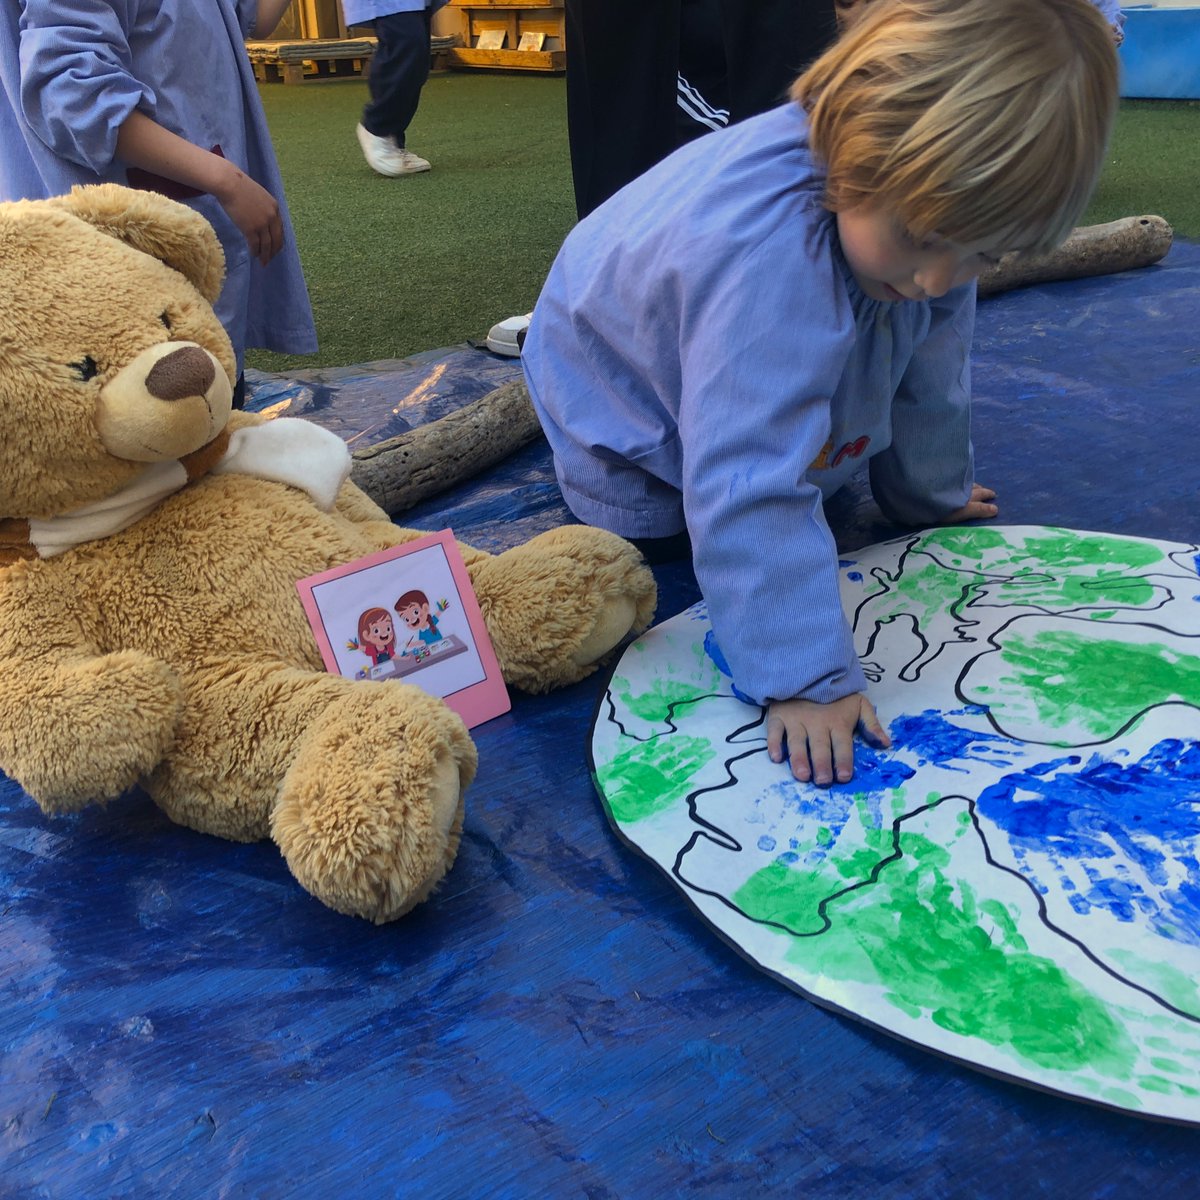 'Our youngest learners are diving into a project on children's rights, guided by @EducemGran students! Last week, they welcomed Lina, the teddy bear, on their journey. Exploring UNICEF Article 31, they painted the world with their hands! #UNICEF #rightsrespectingschool